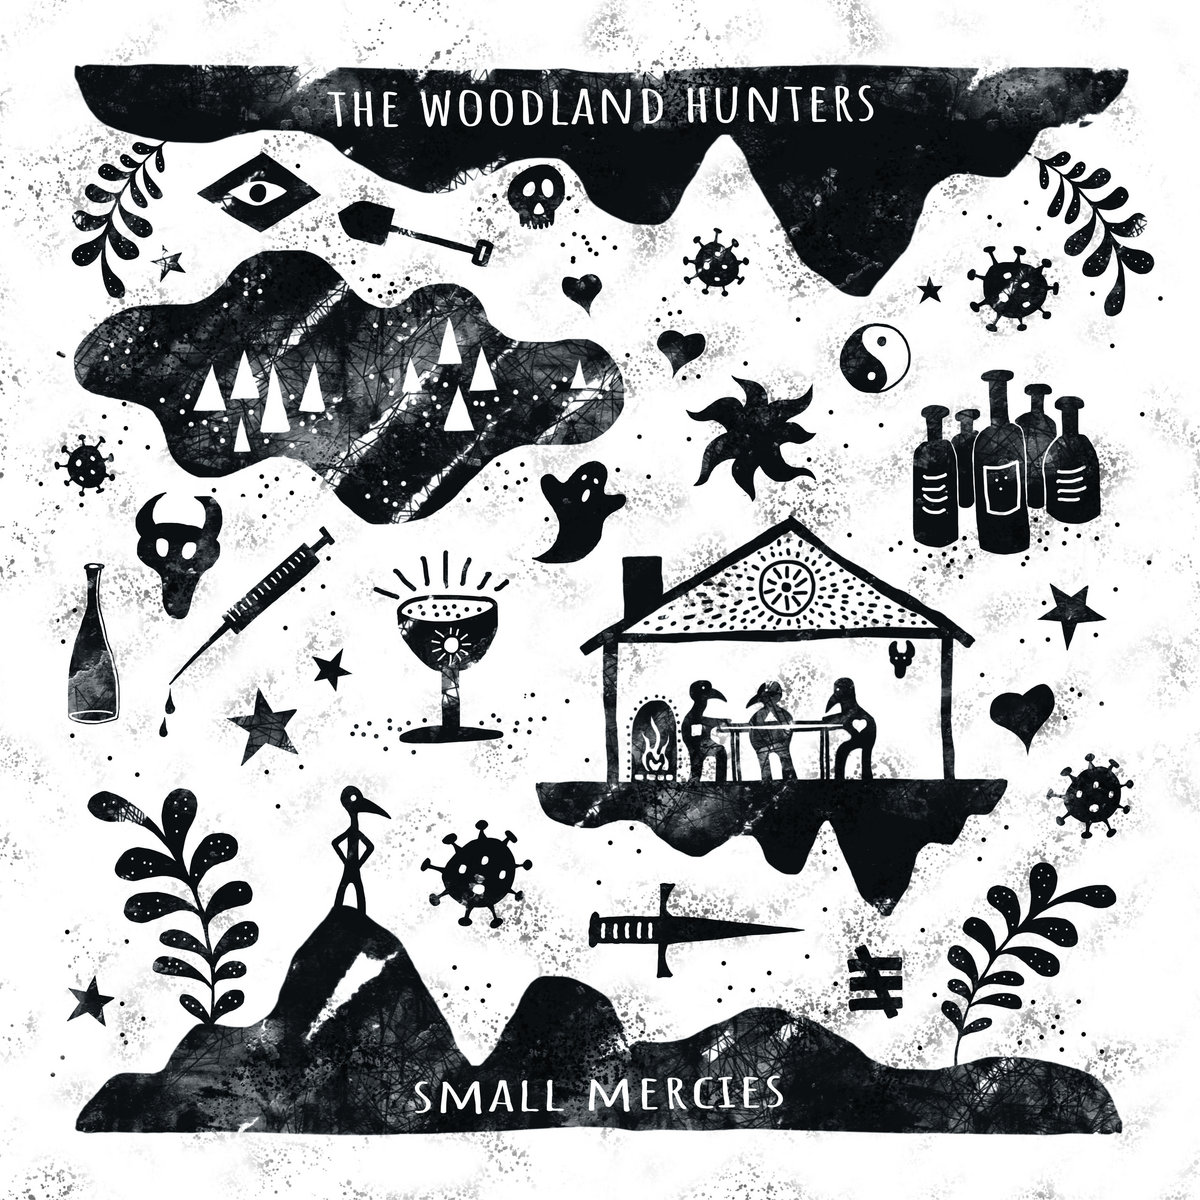 The Woodland Hunters cover